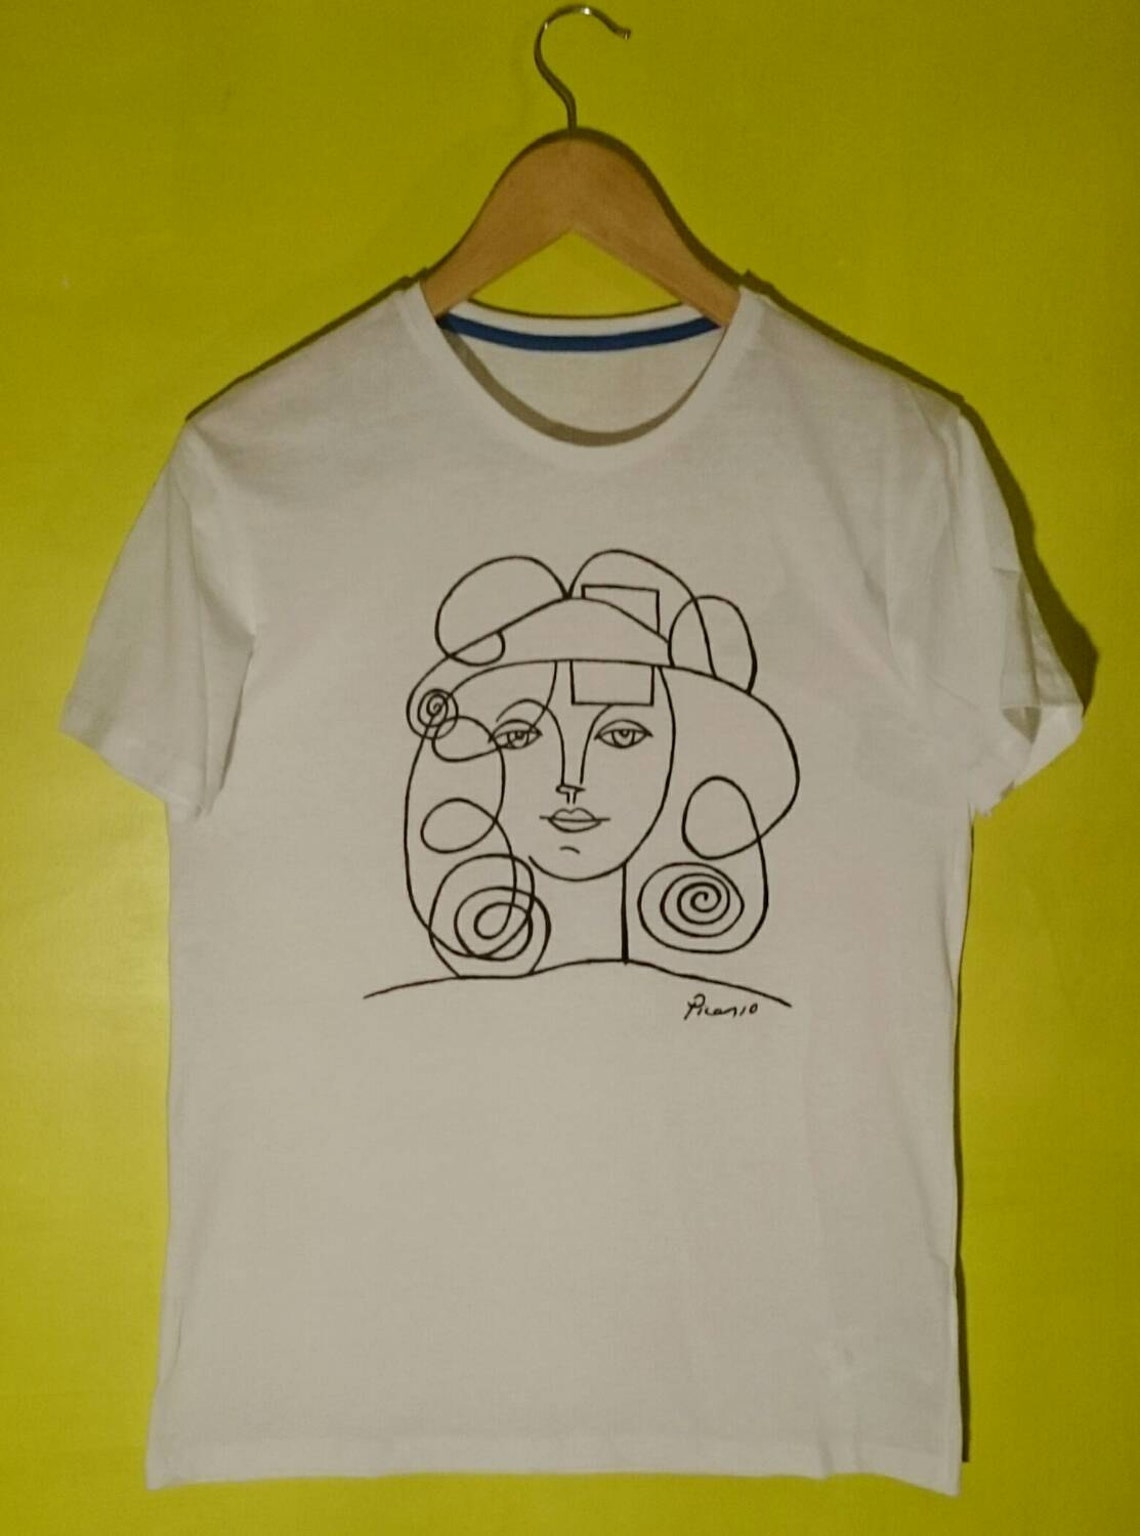 Picasso Woman With Curls Sketch T Shirt - Etsy